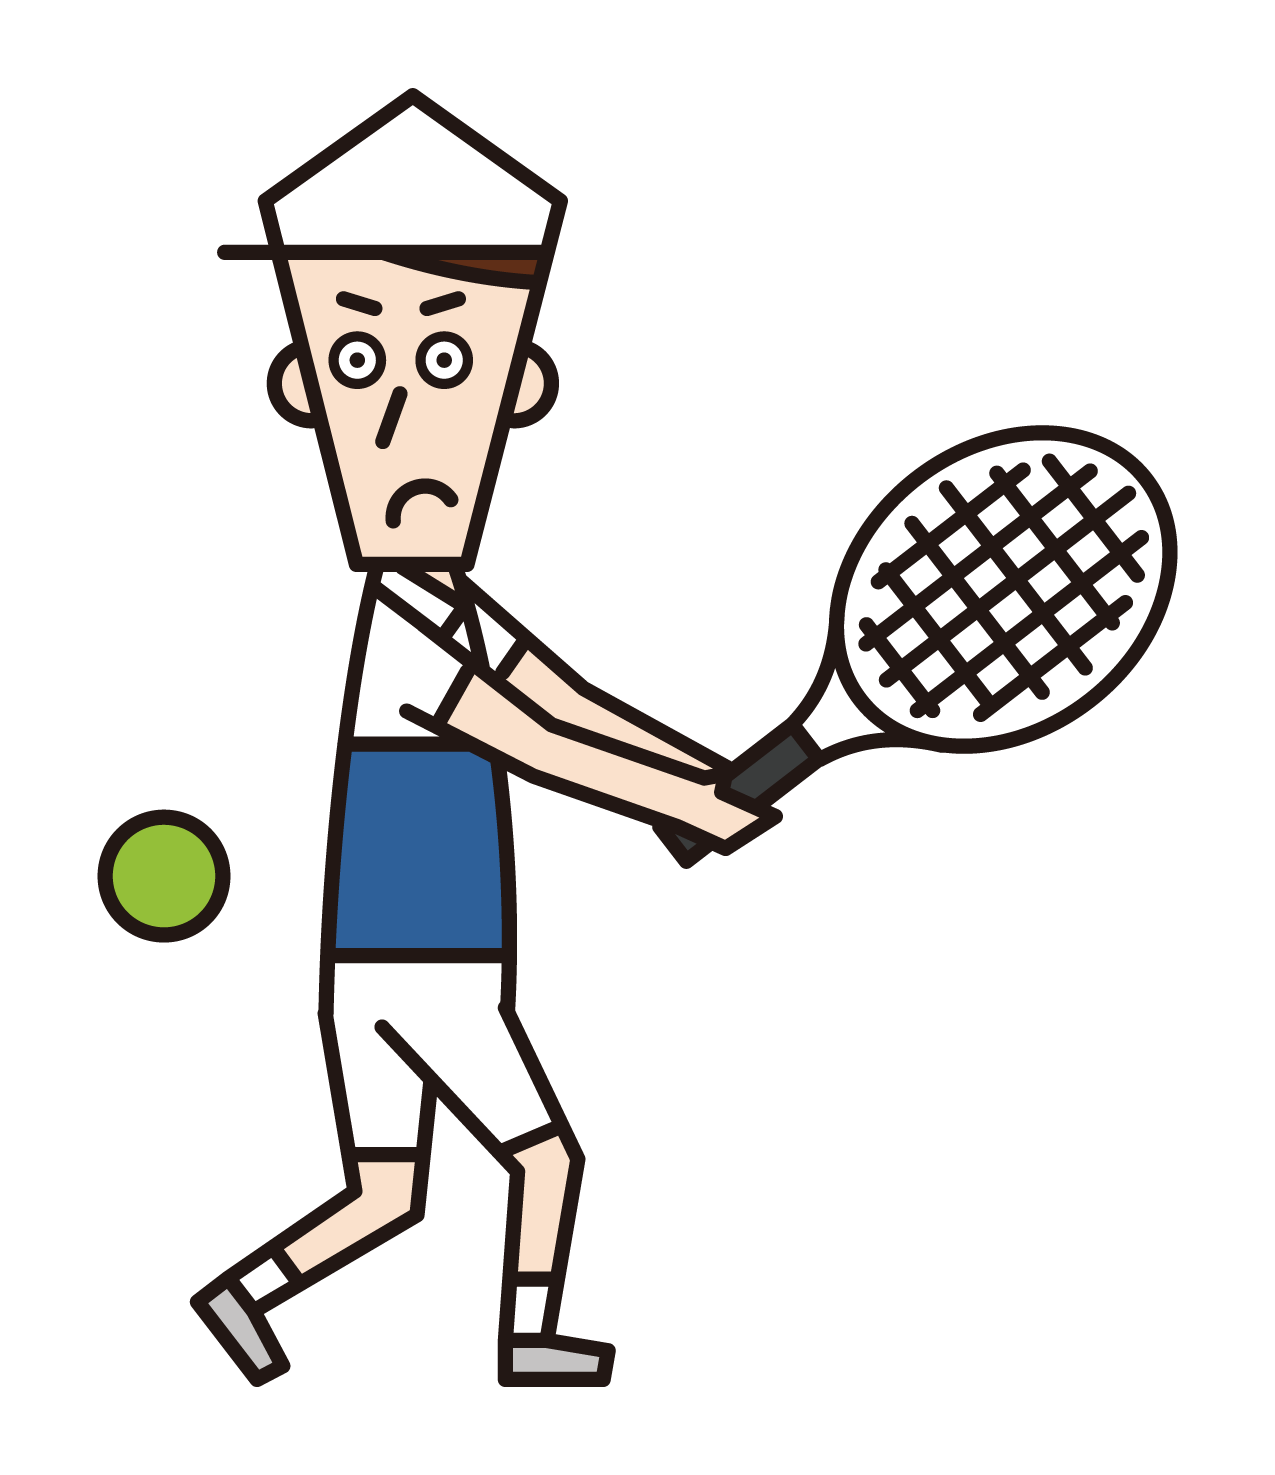 Illustration of a tennis player (male) hitting the ball back with a backhand stroke